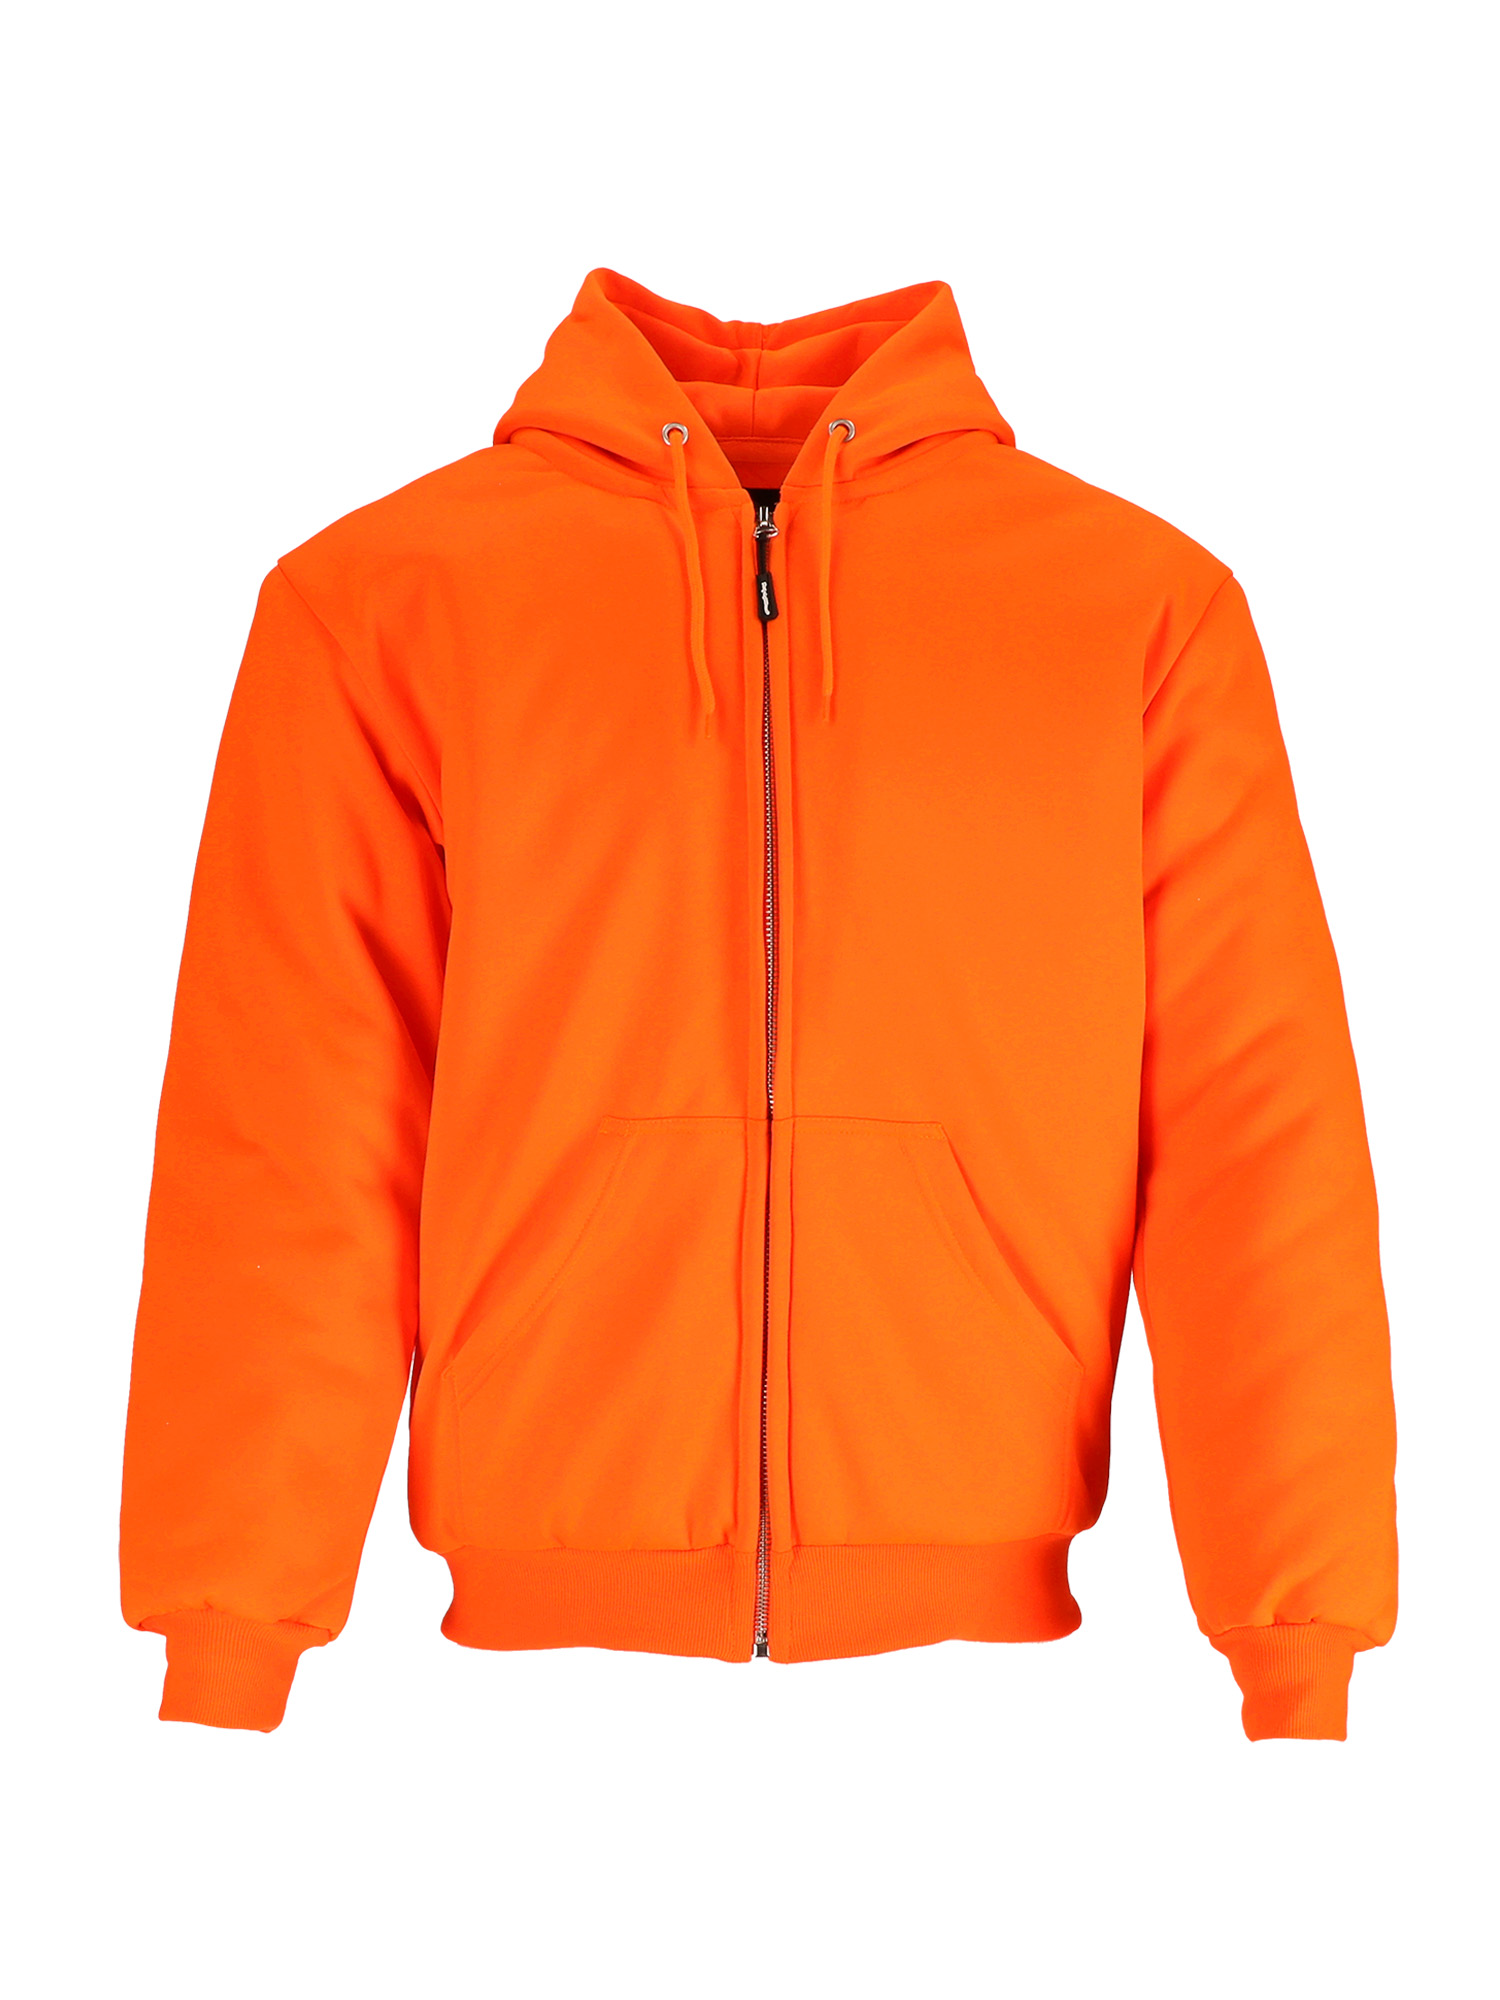 RefrigiWear HiVis Insulated Quilted Sweatshirt | Orange | Fit: Big & Tall | Ragg Wool/Polyester/Fabric | XL